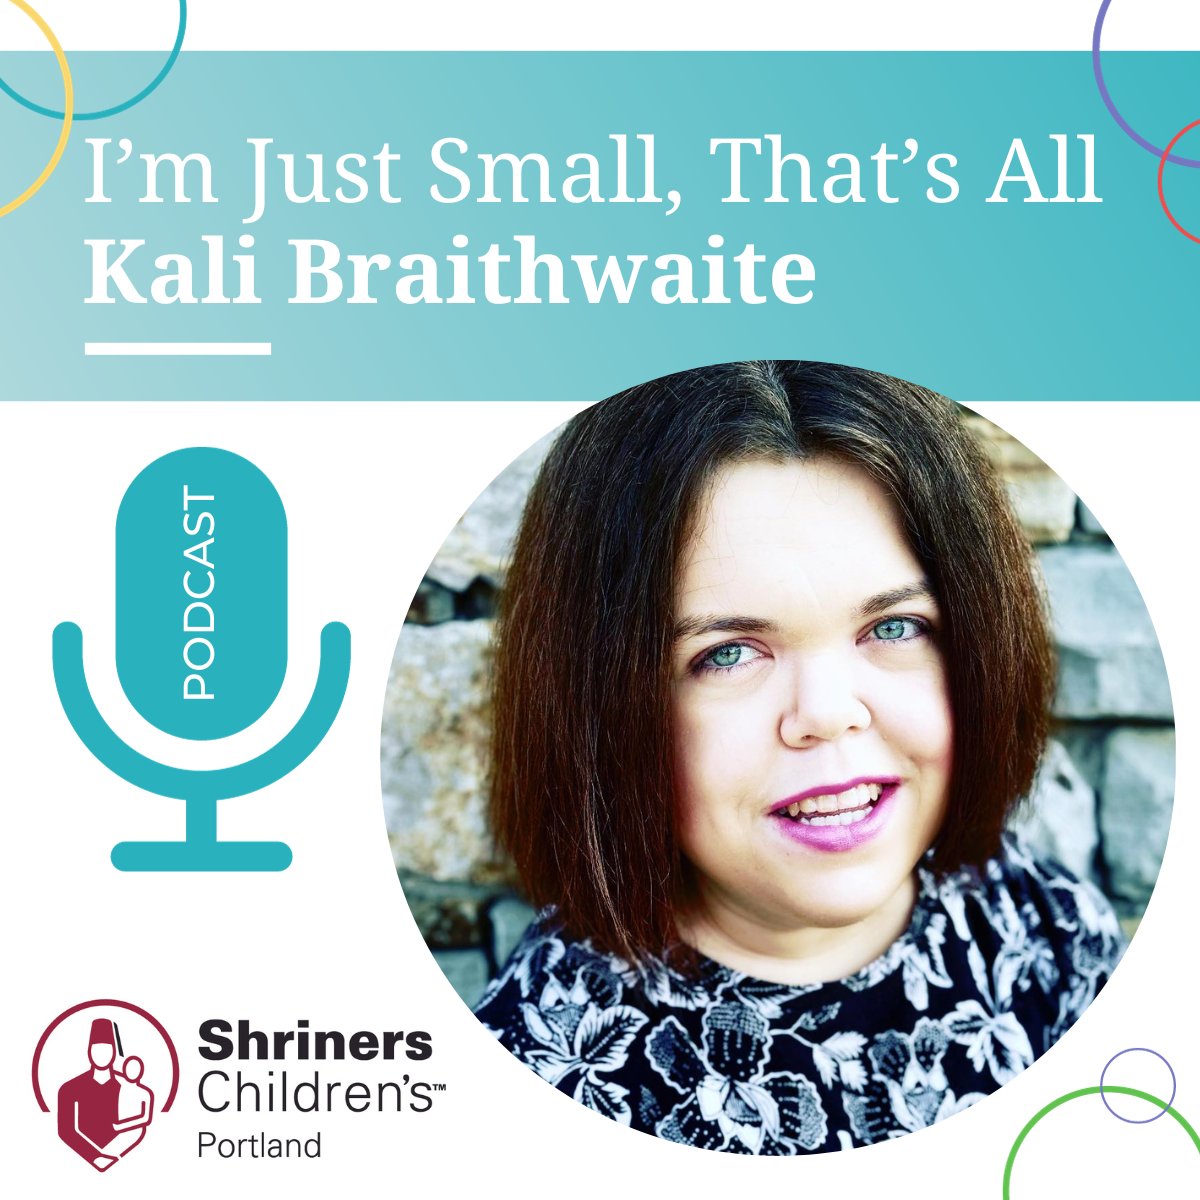 In the newest episode of Healing Heroes PDX – A Shriners Children's Portland Podcast, guest Kali Braithwaite, dwarfism advocate, talks about her life, her medical experience with Robert Bernstein, MD, and Dwarfism Awareness Day.💜 shrinerschildrens.org/en/news-and-me…